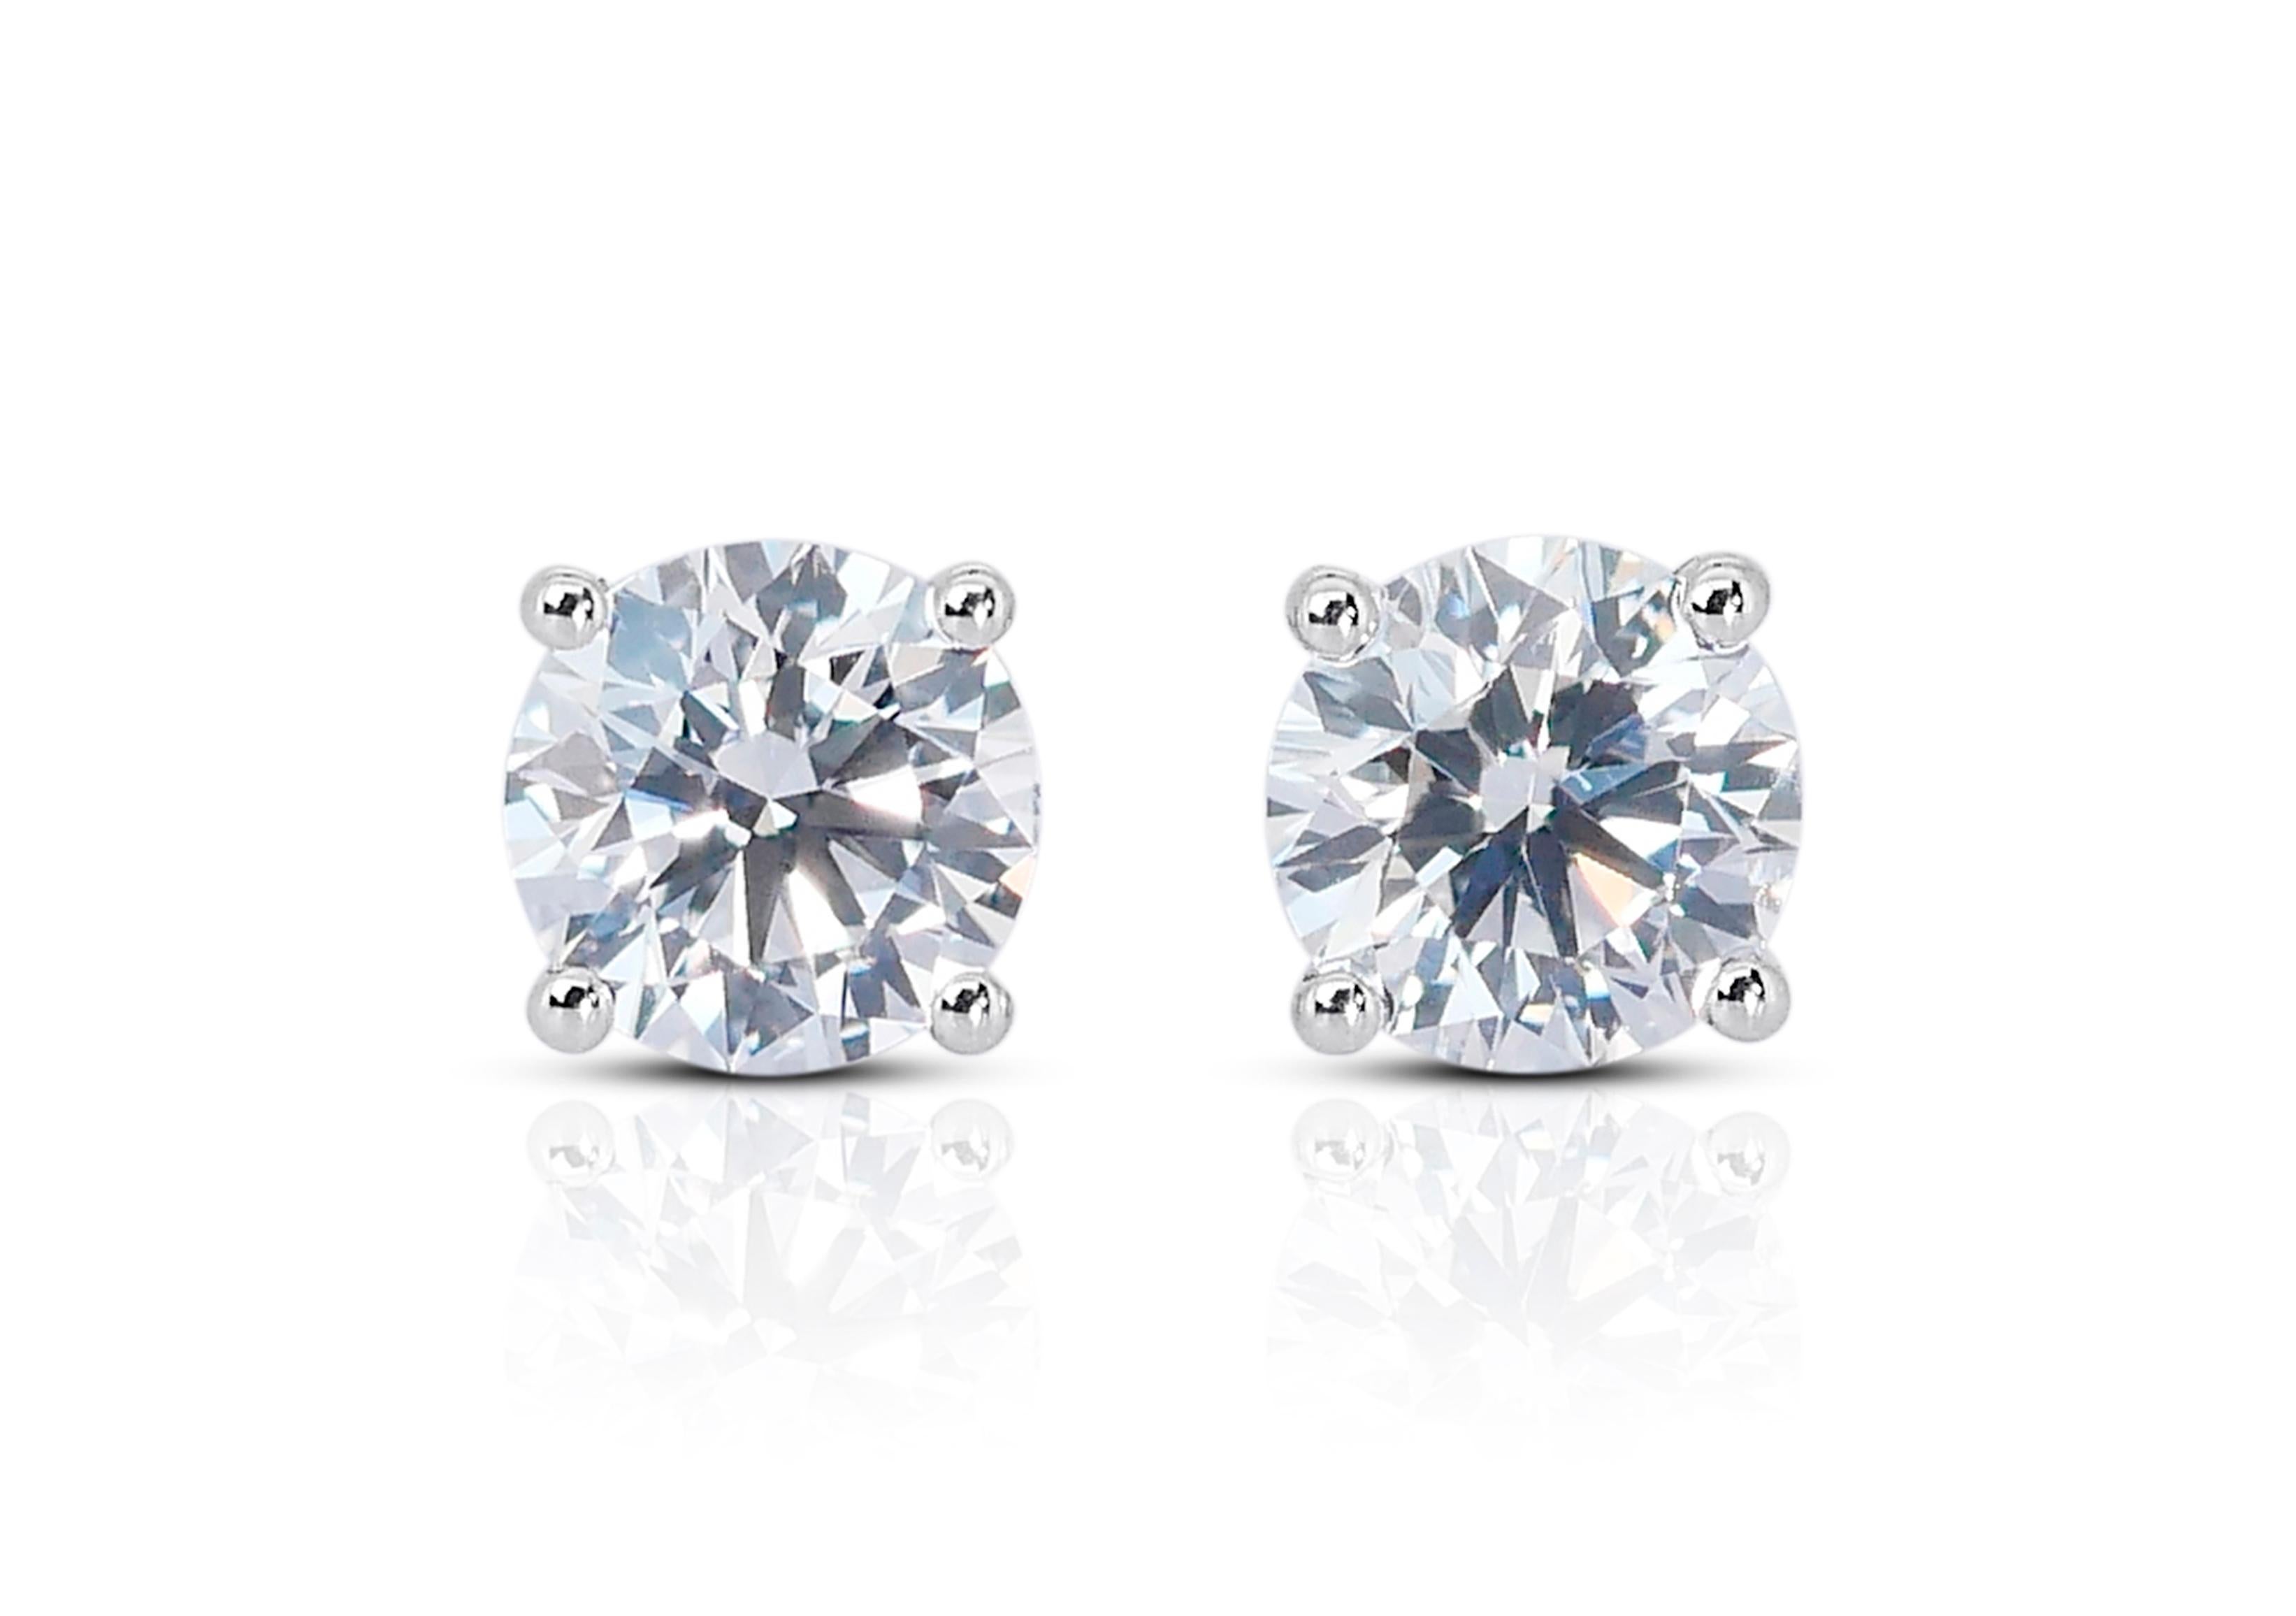 Spectacular 2.06ct Diamond Stud Earrings in 18k White Gold - GIA Certified

Elevate your elegance with these exceptional diamond stud earrings, masterfully crafted from 18k white gold. Each earring is set with a brilliant round diamond, together